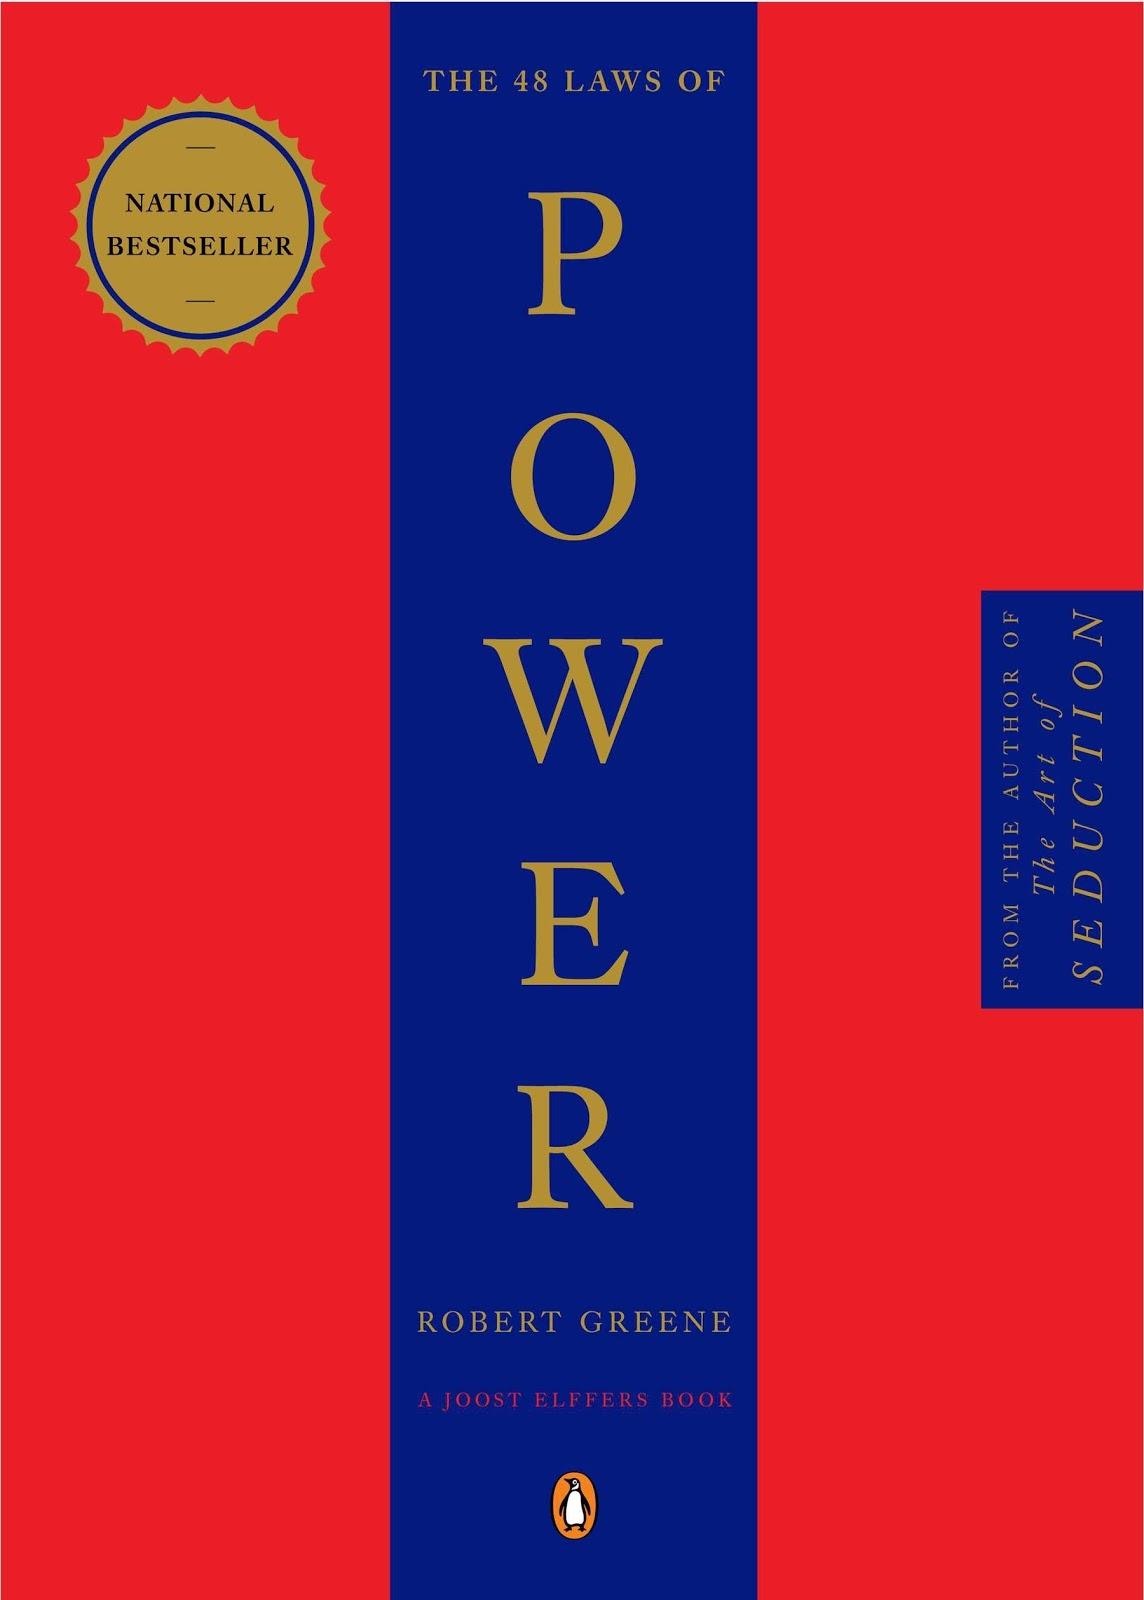 Book "The 48 Laws of Power"